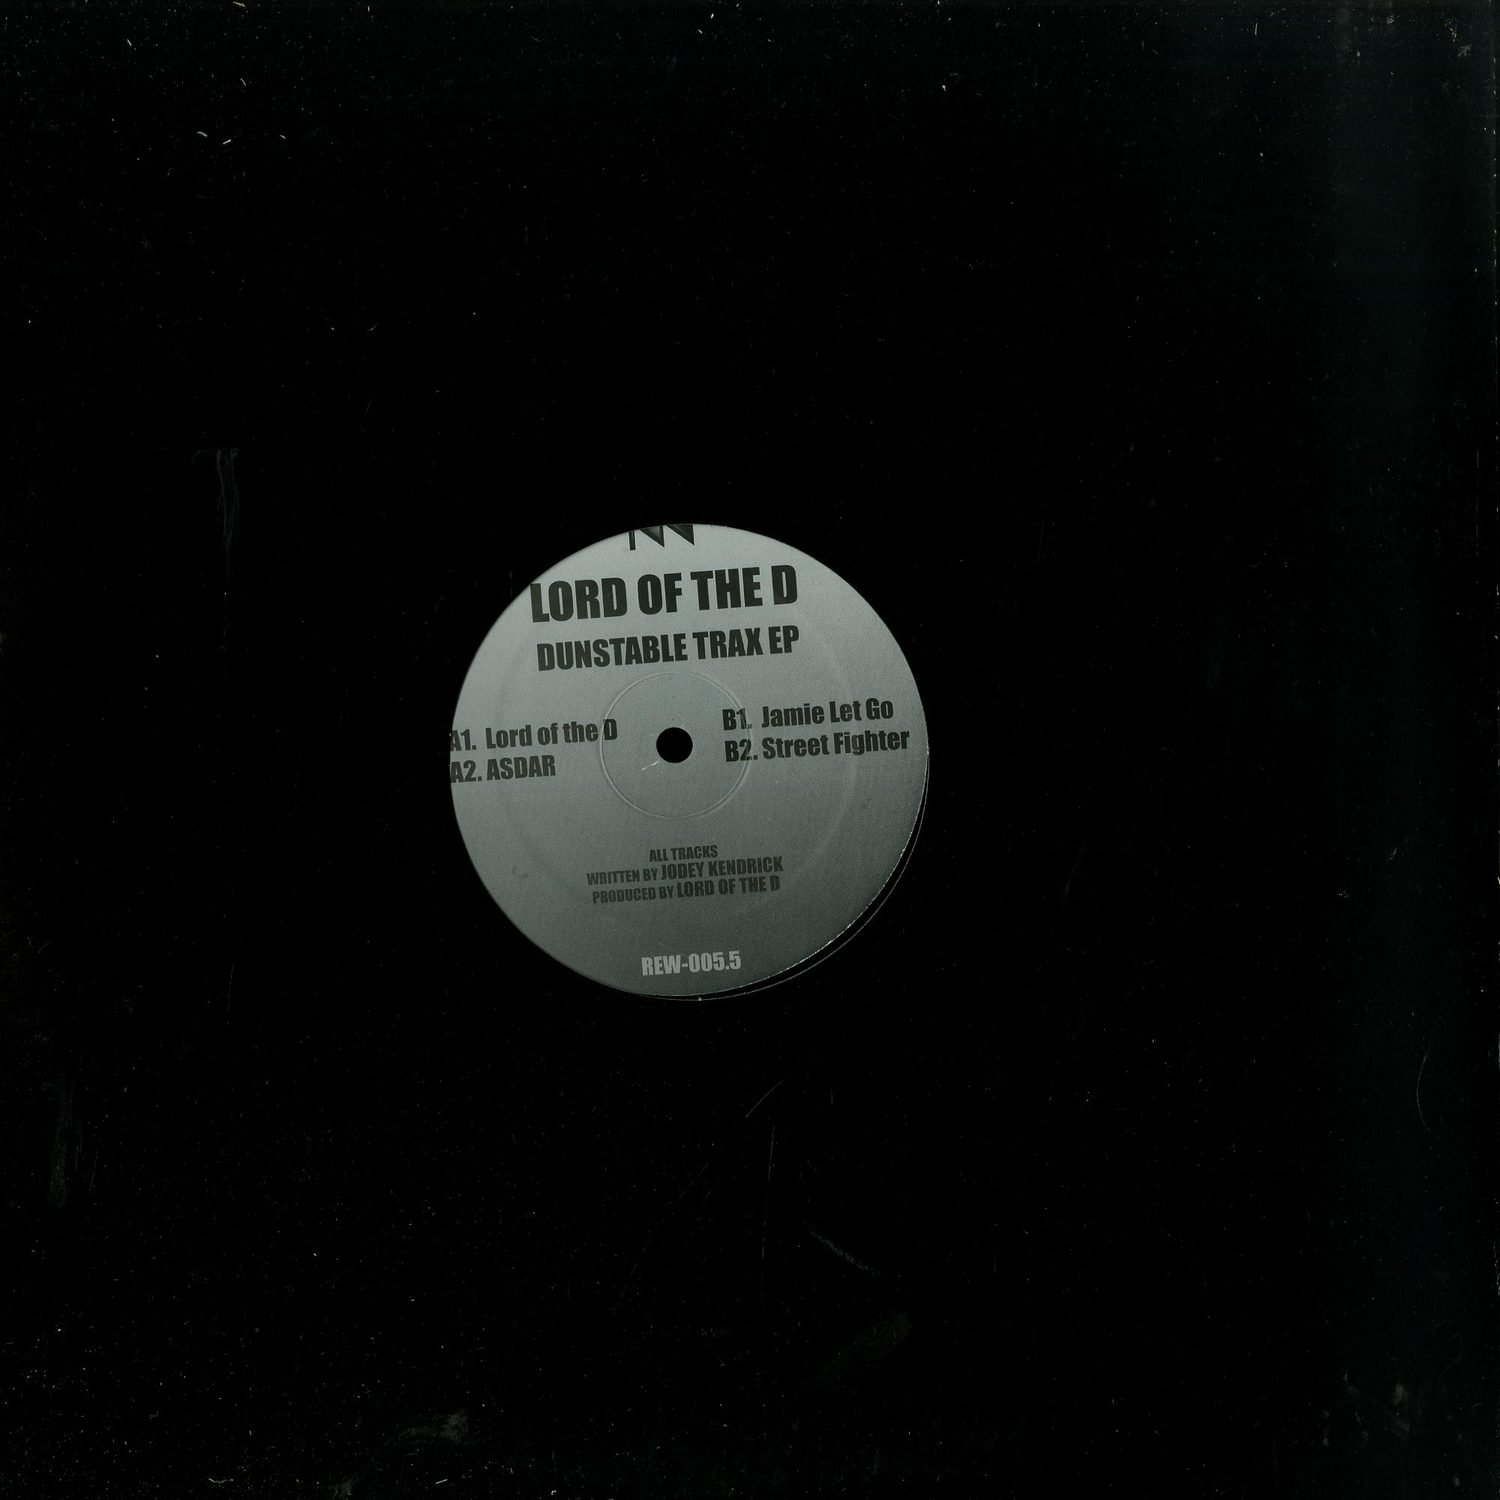 Lord Of The D - DUNSTABLE TRAX EP